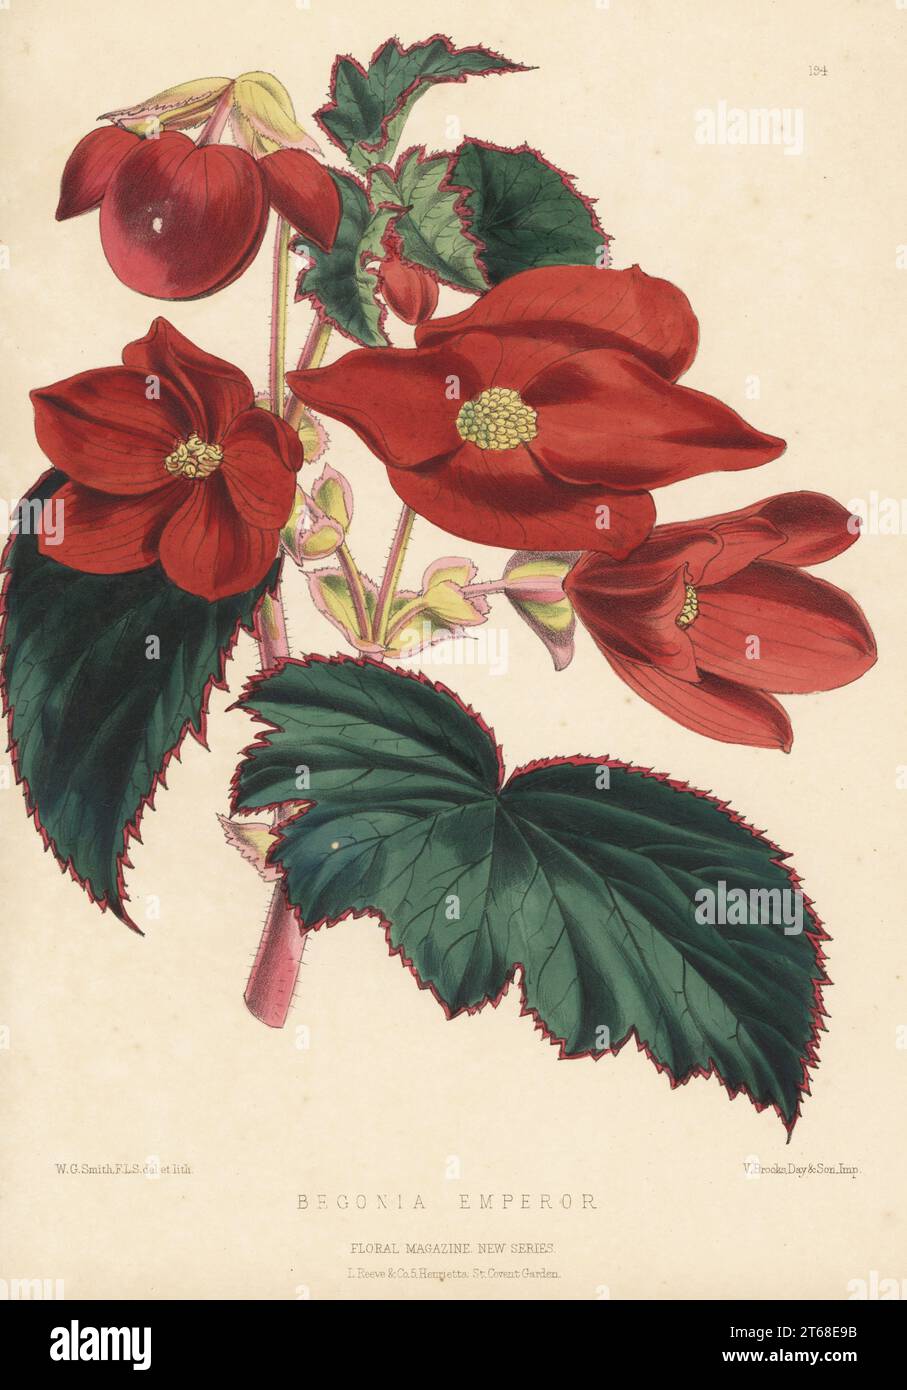 Begonia cultivar, Emperor. Hybrid of Begonia clarkii x Begonia chelsoni, raised by James Veitch and Sons, Chelsea. Handcolored botanical illustration drawn and lithographed by Worthington George Smith from Henry Honywood Dombrain's Floral Magazine, New Series, Volume 5, L. Reeve, London, 1876. Lithograph printed by Vincent Brooks, Day & Son. Stock Photo